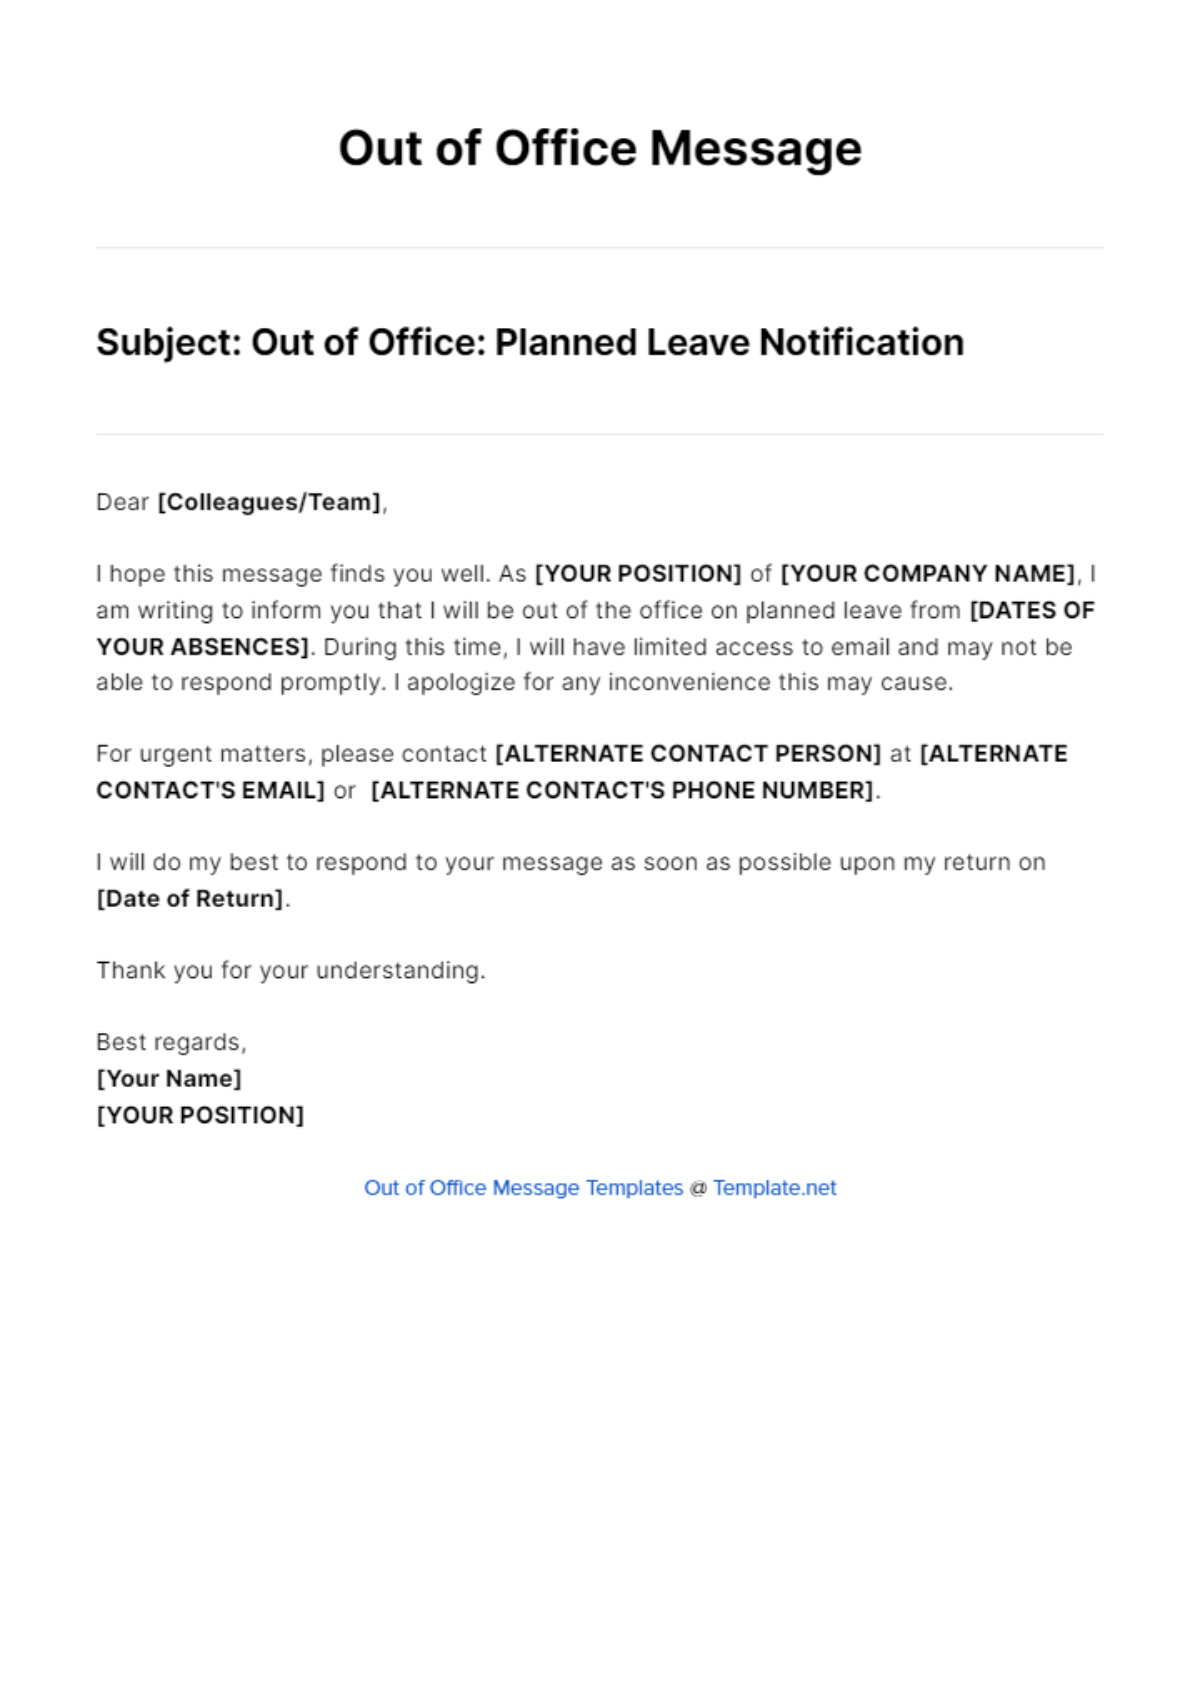 Planned Leave Out Of Office Message Template